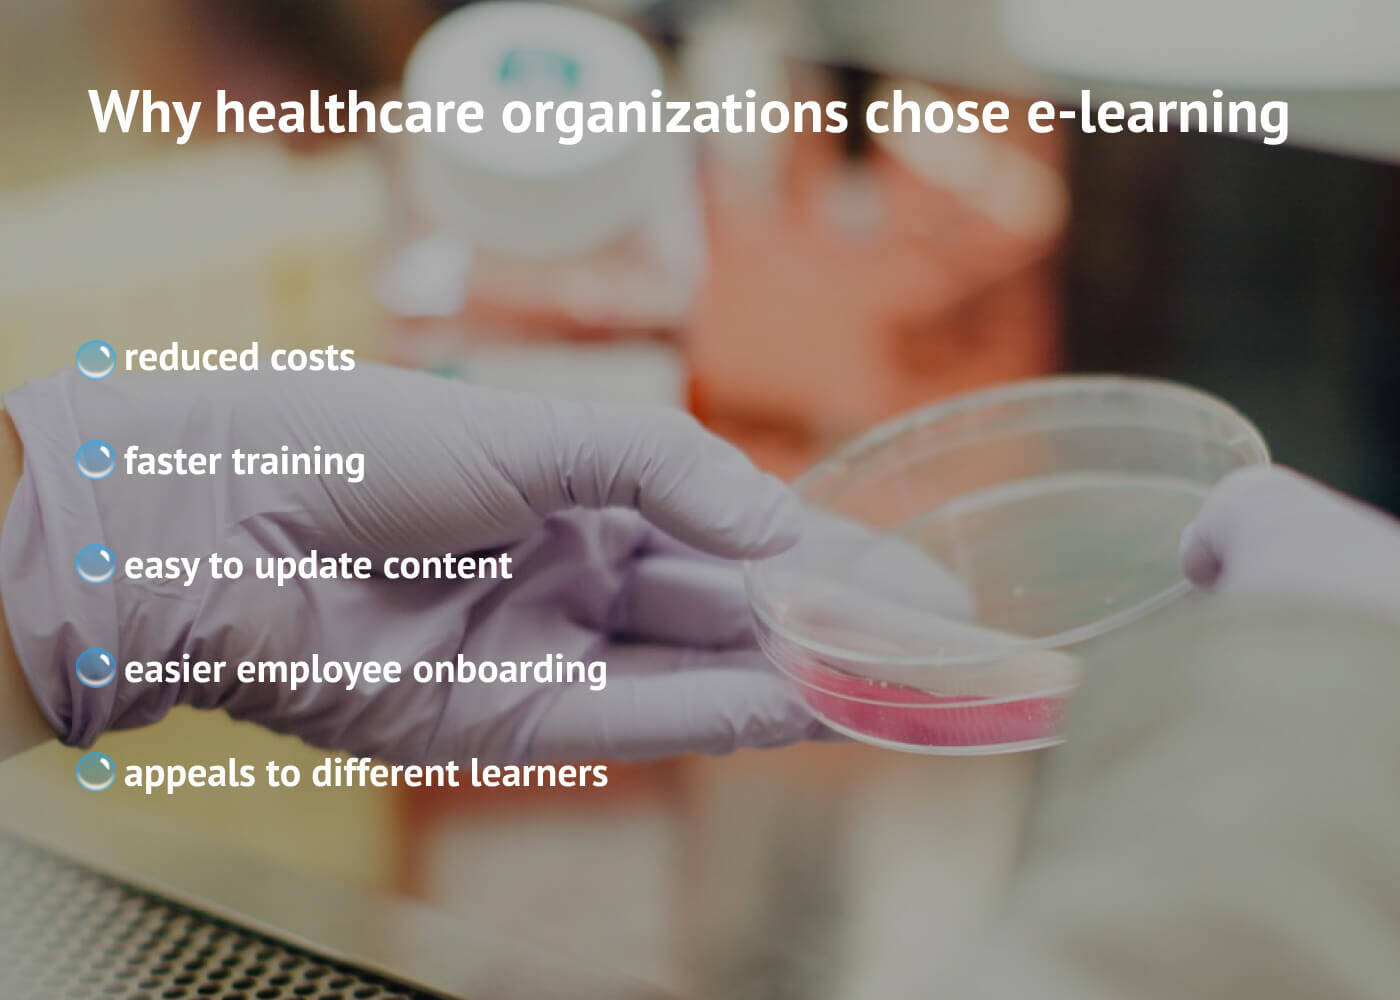 Why healthcare organizations chose e-learning